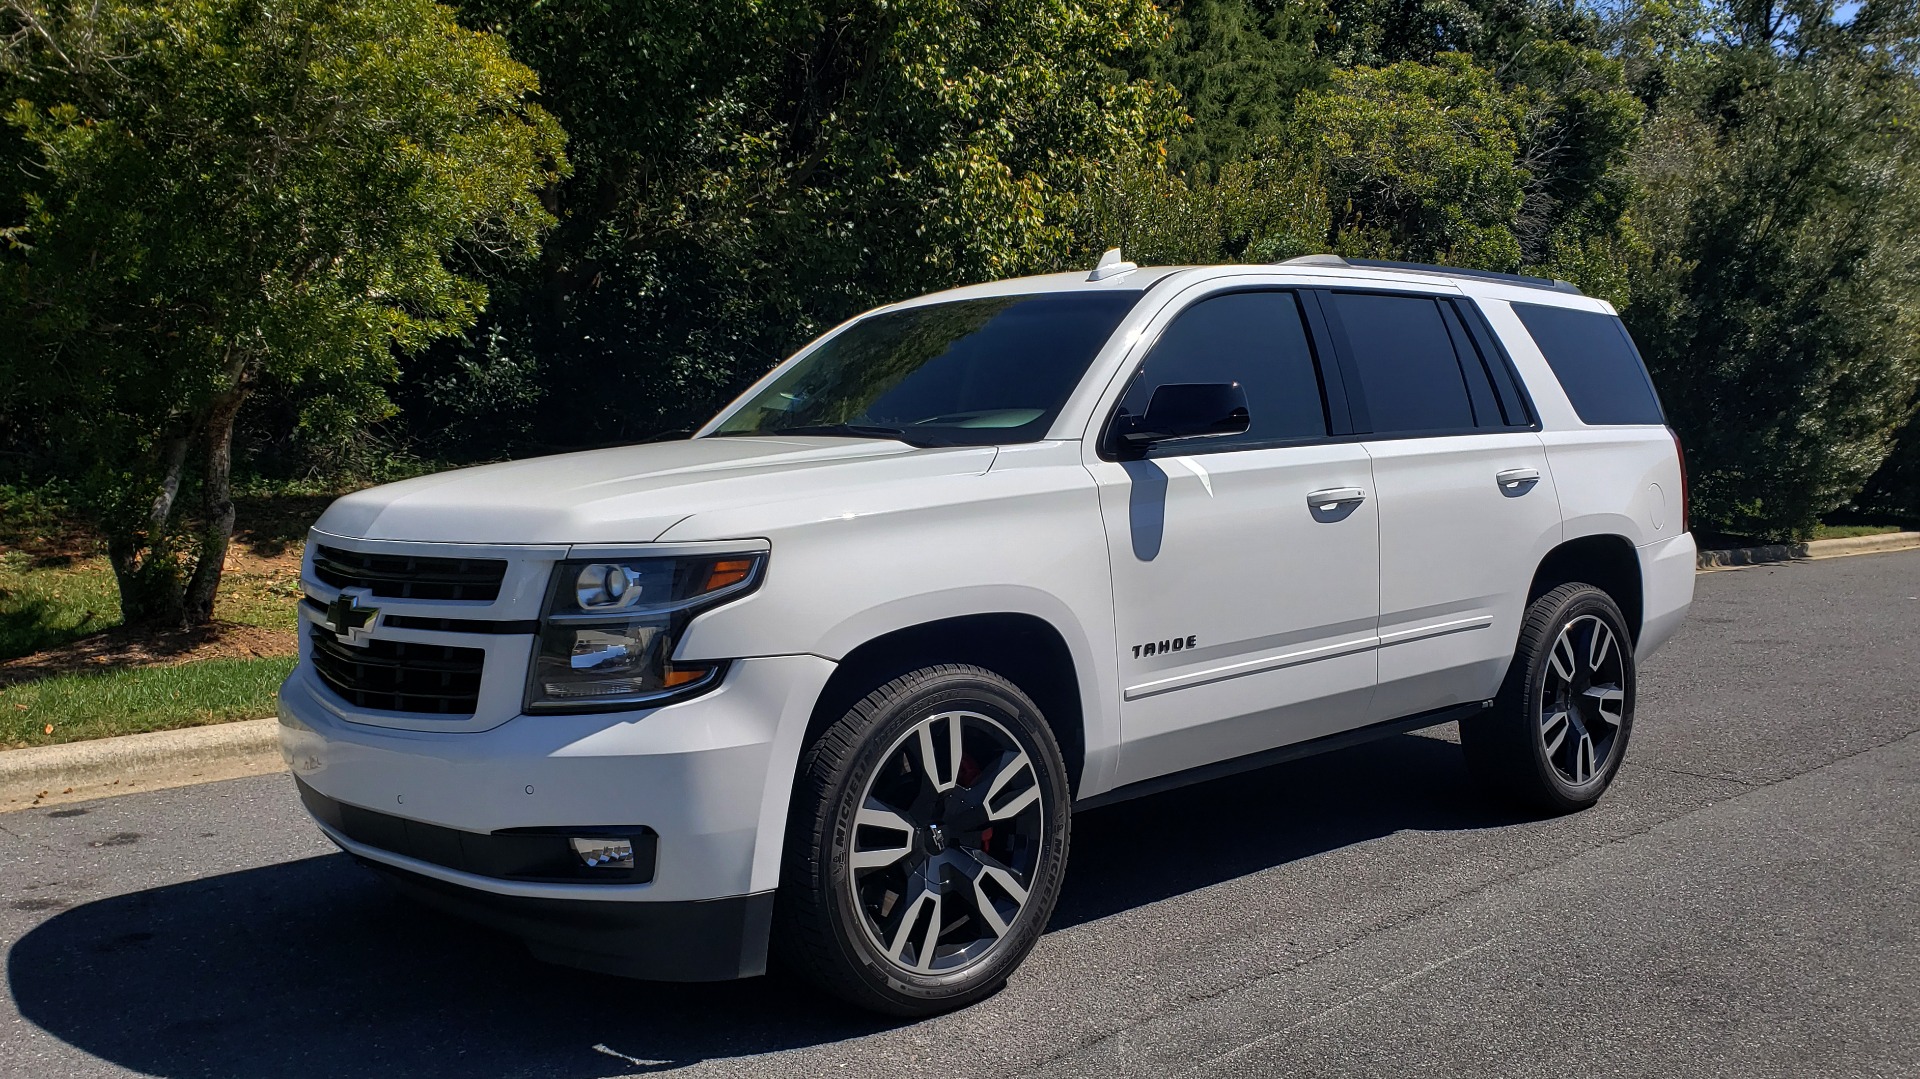 Used 2018 Chevrolet TAHOE PREMIER 4WD / 6.2L V8 / NAV / SUNROOF / ENT / BOSE / 3-ROW / REARVIEW for sale Sold at Formula Imports in Charlotte NC 28227 7